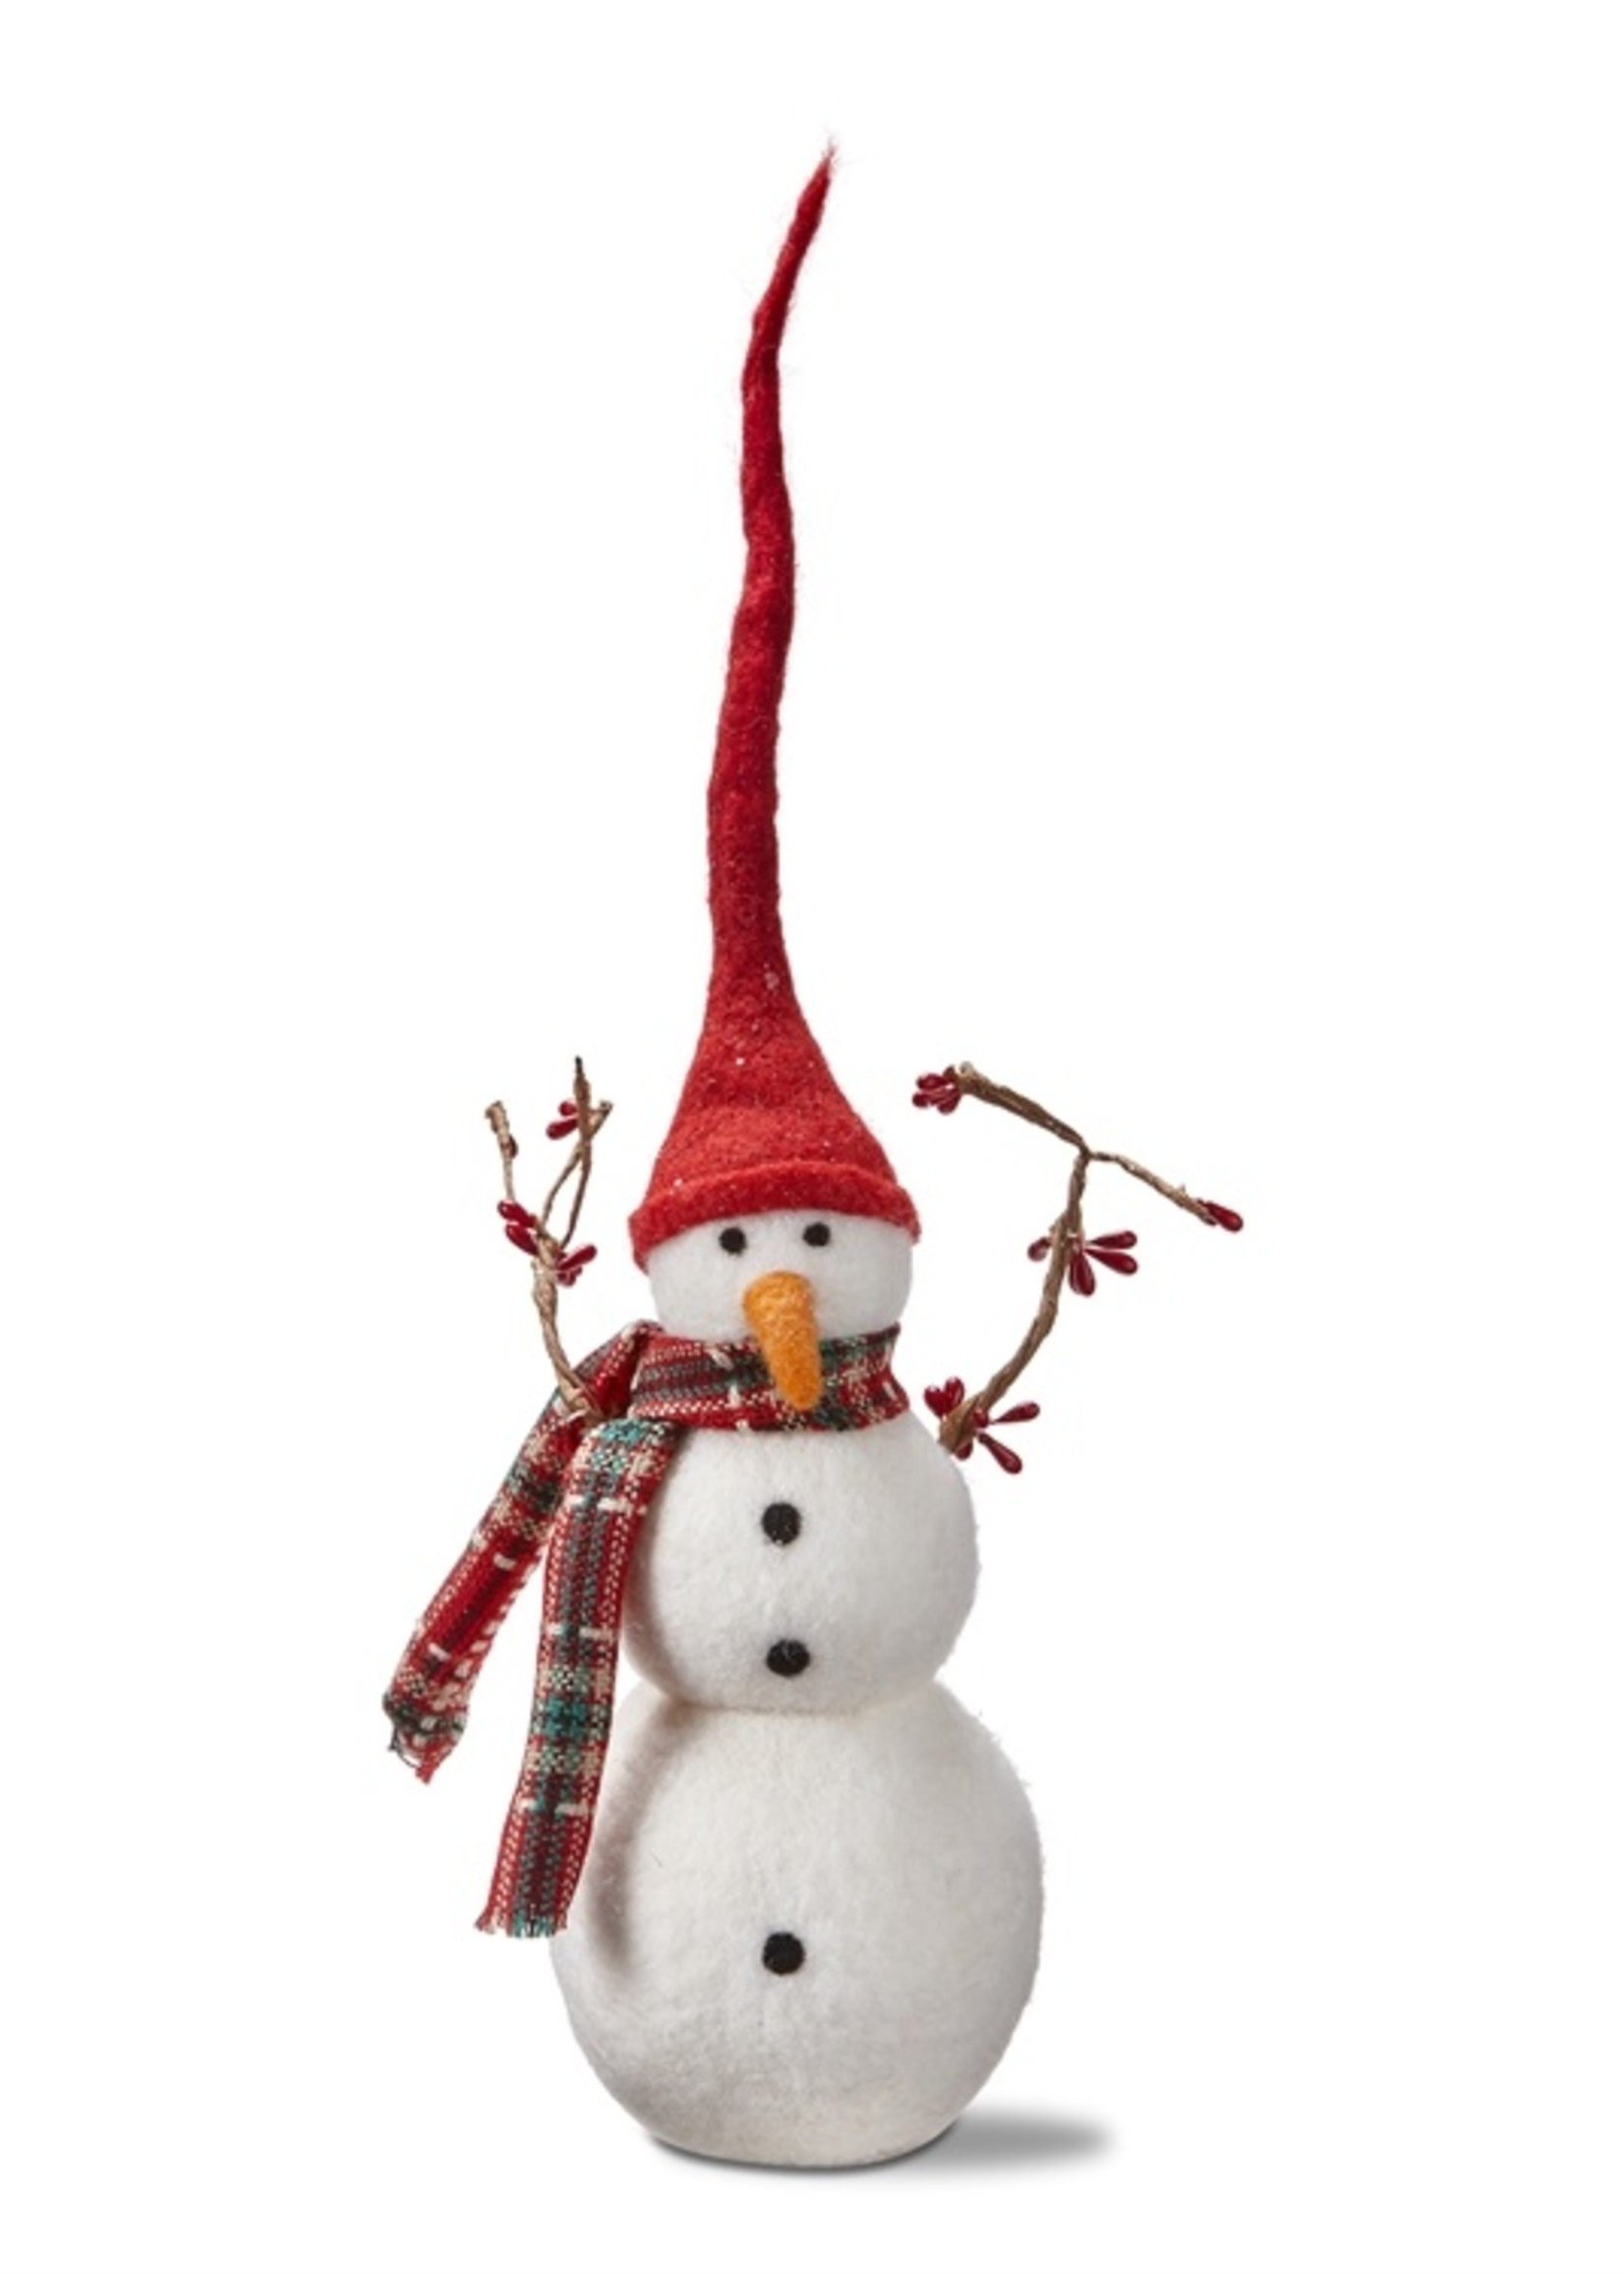 Tag Snowman with Branch Arms * Large